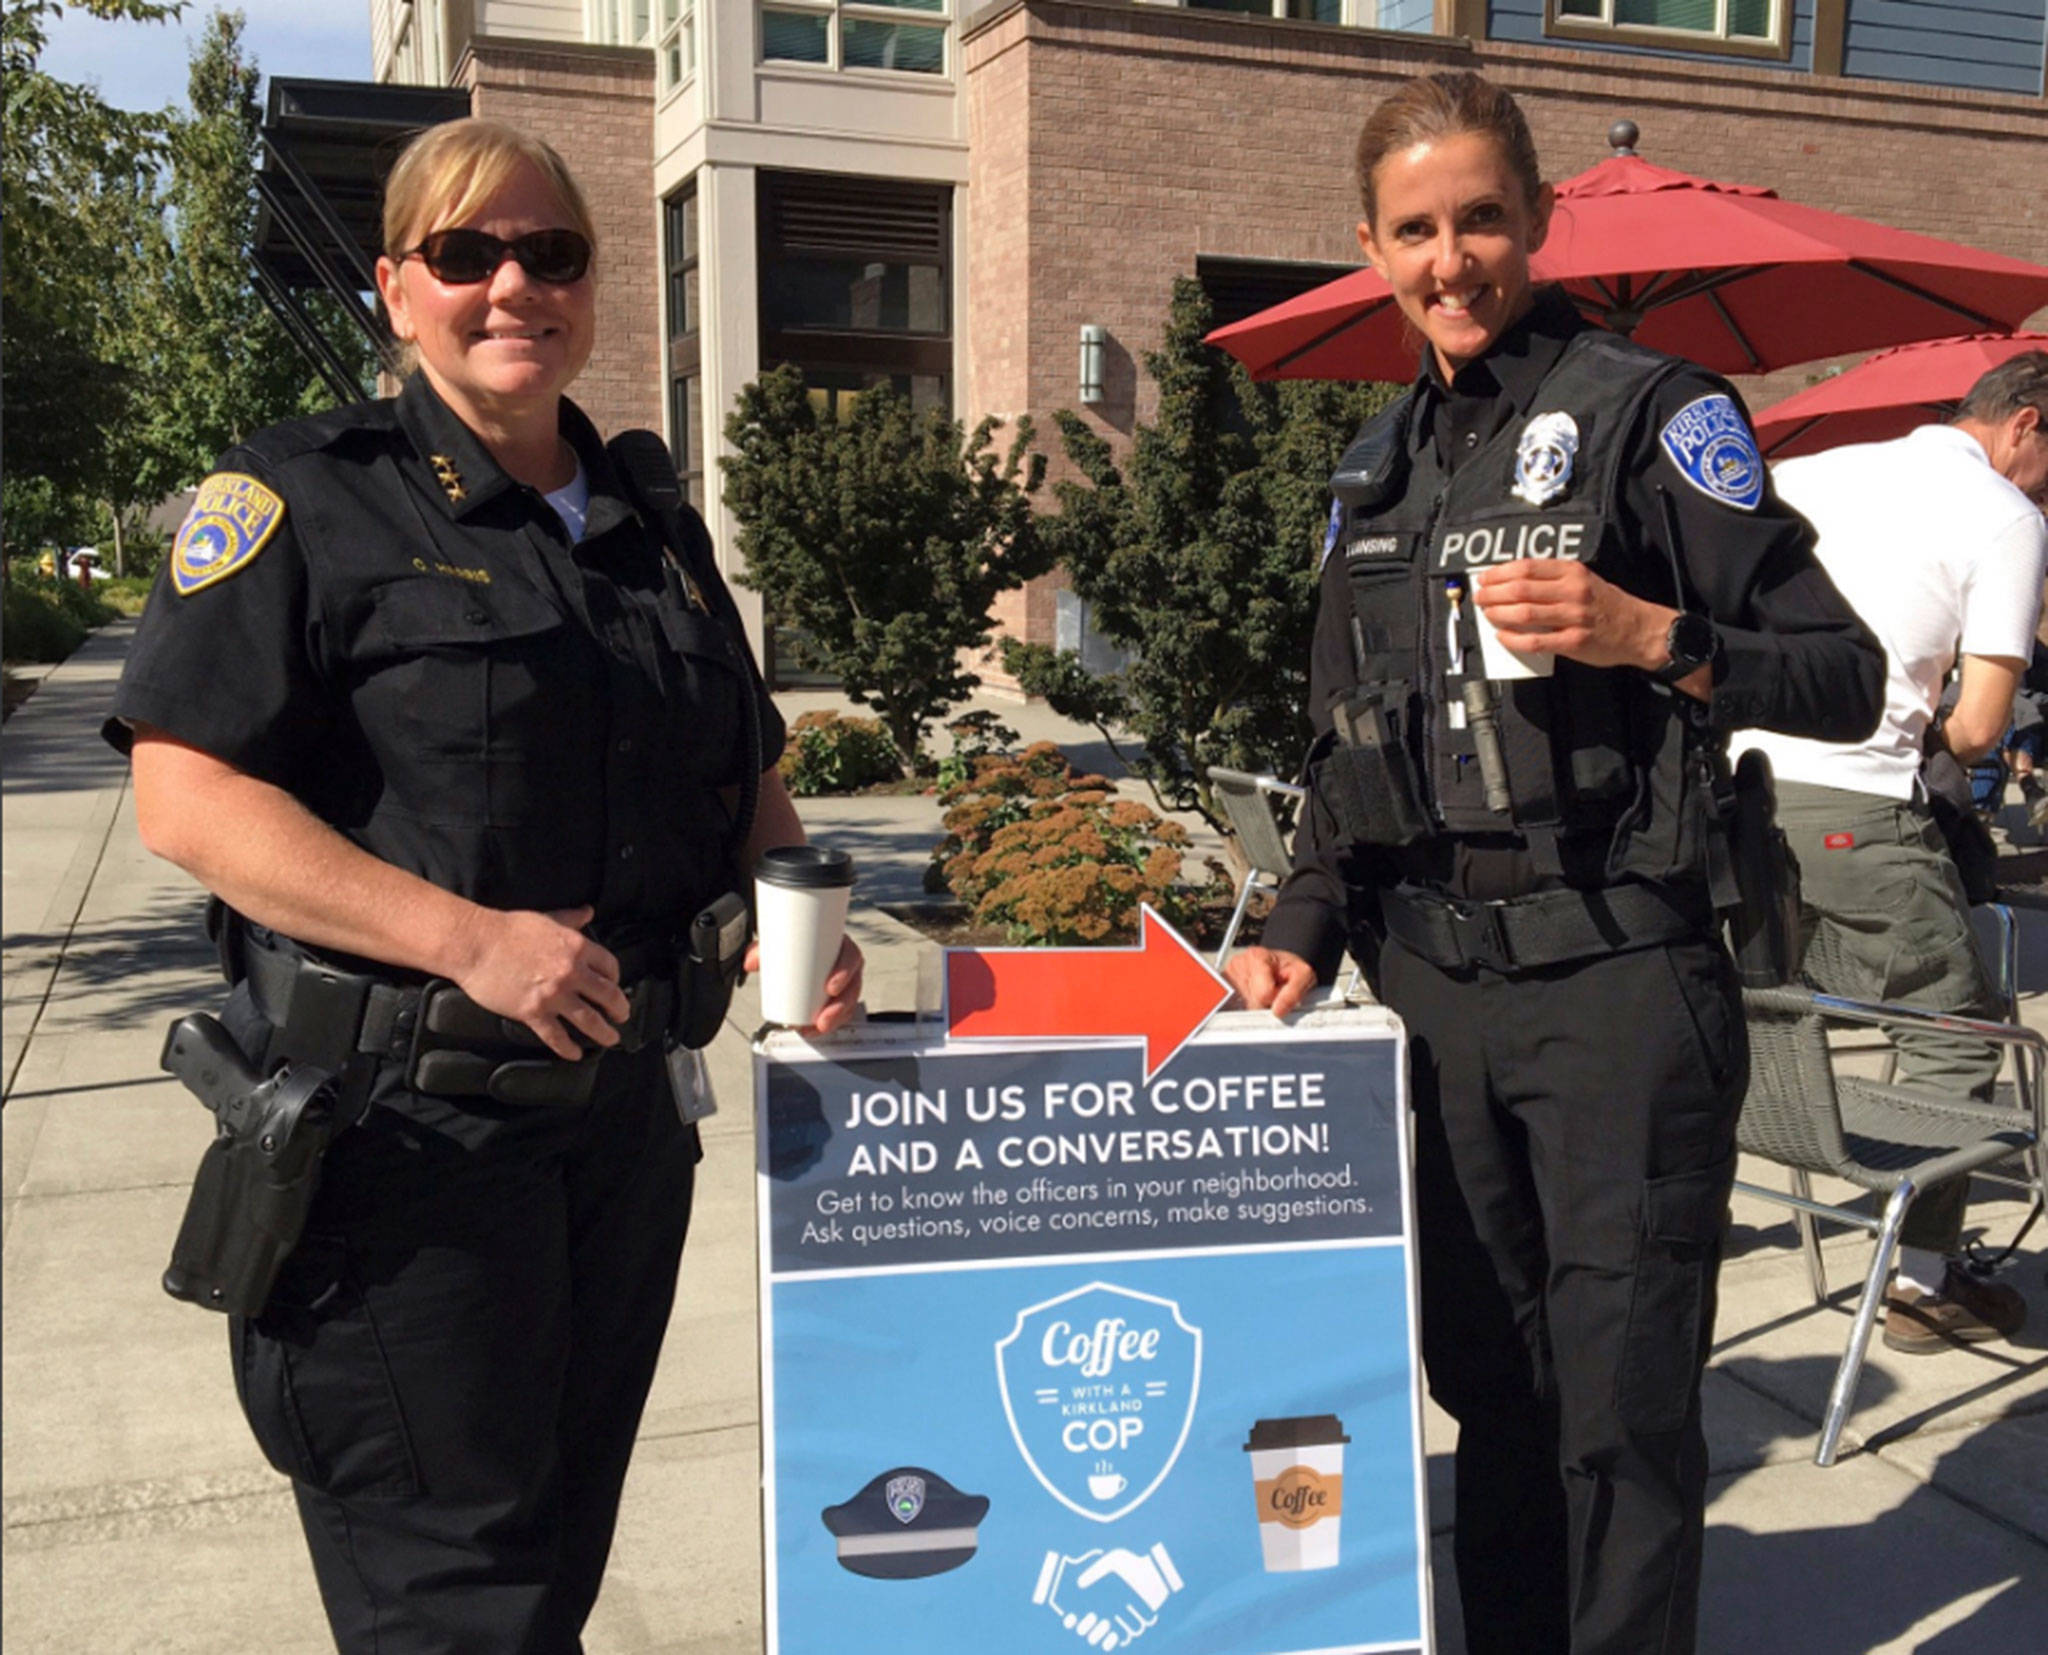 Kirkland Police Chief Cherie Harris and Officer Deanna Lansing meet the community at a Coffee with a Cop event in October 2017. Photo via Twitter